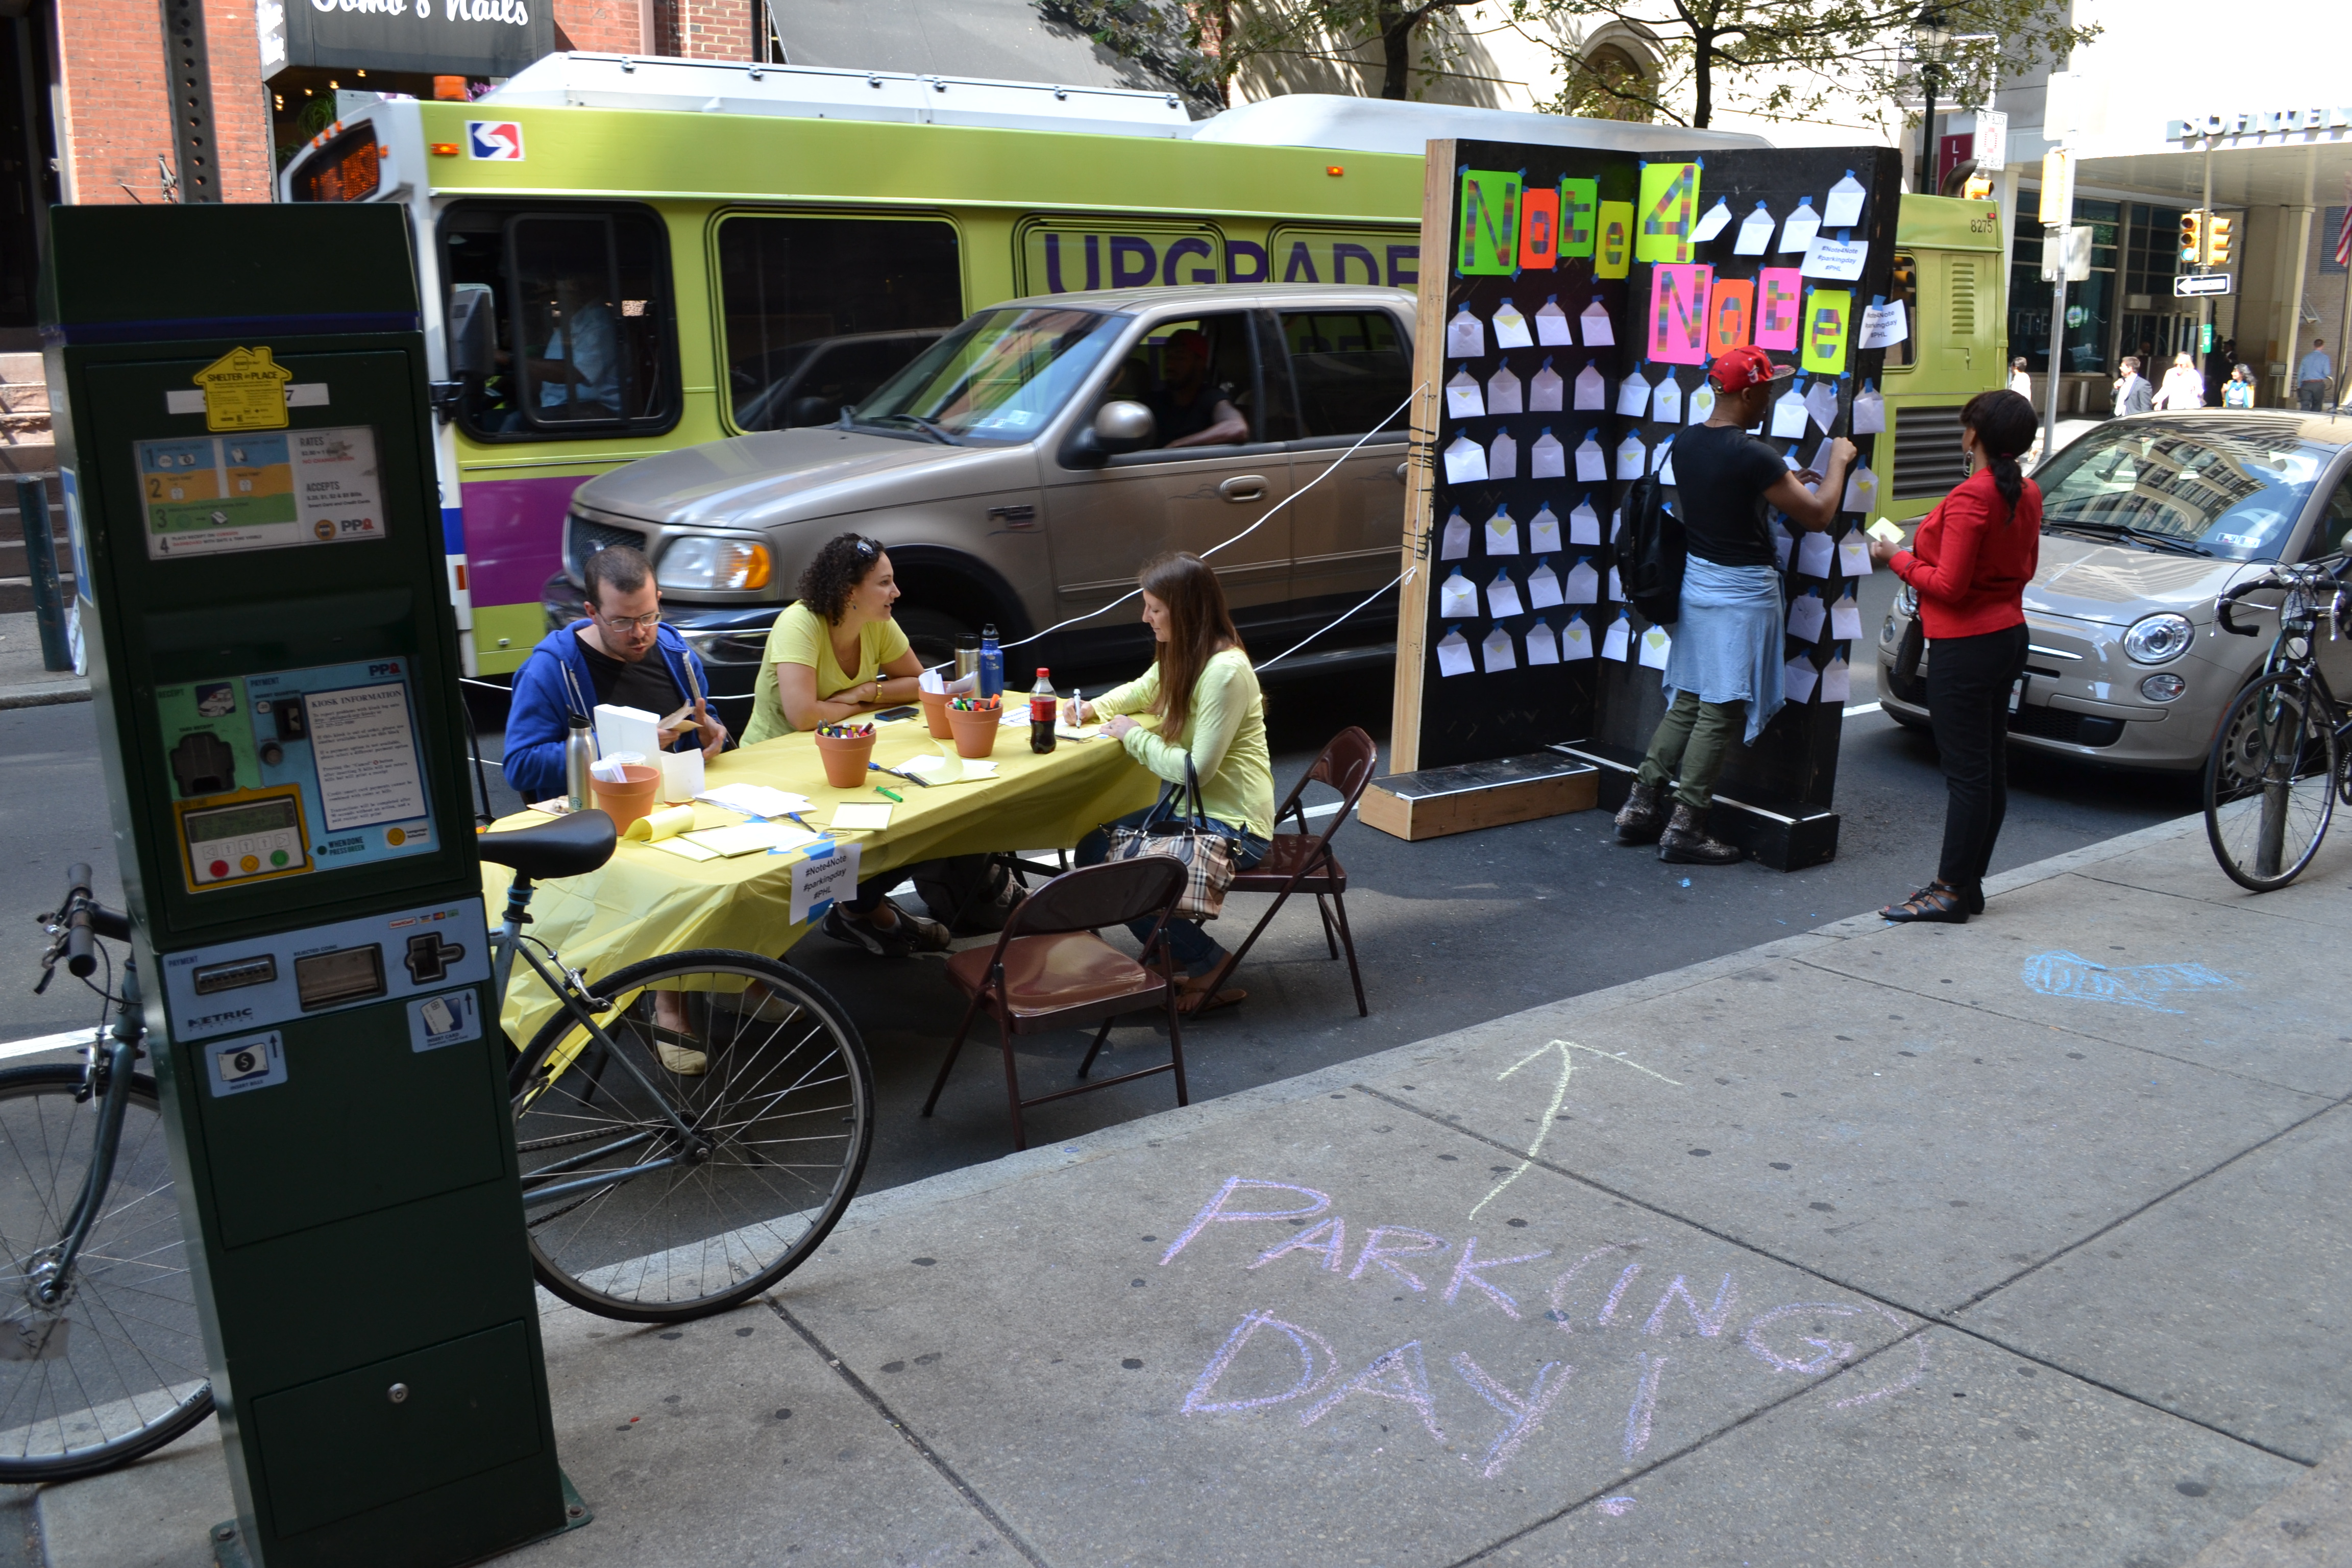 Park(ing) Day: Note-4-Note